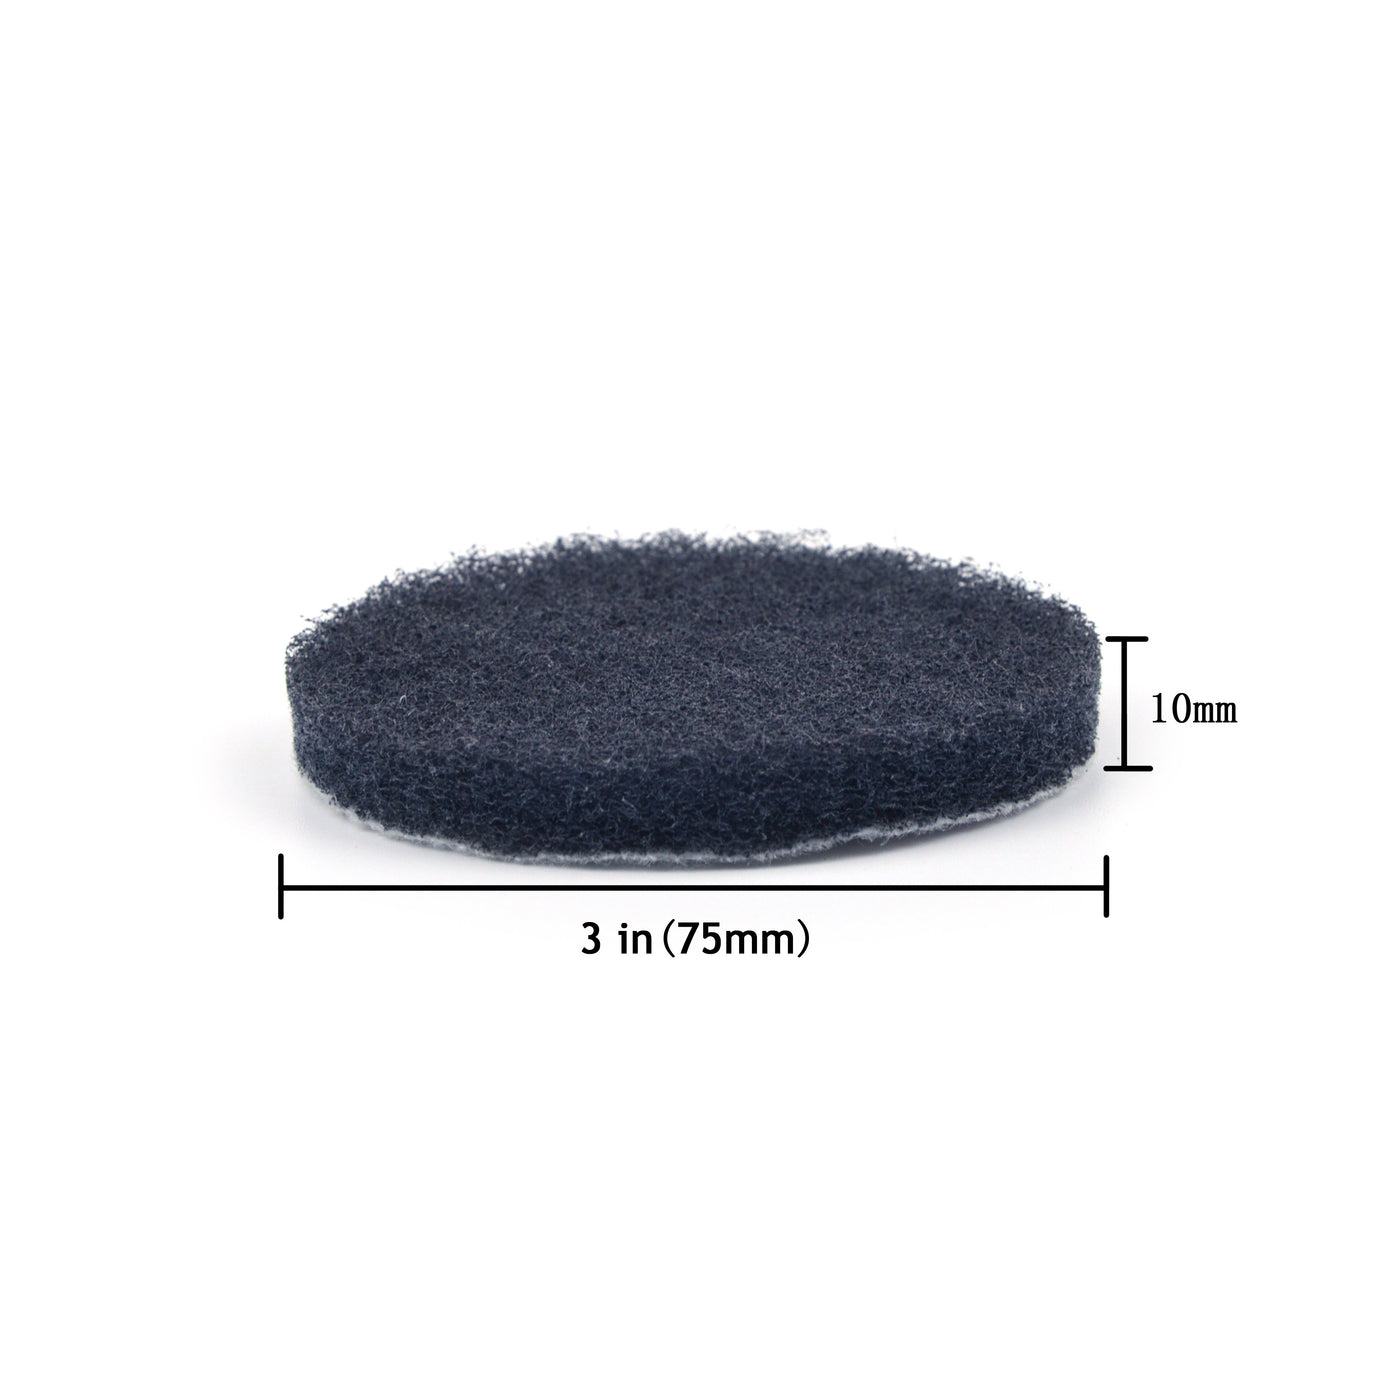 3 inch (75mm) Velcro Scouring Pads